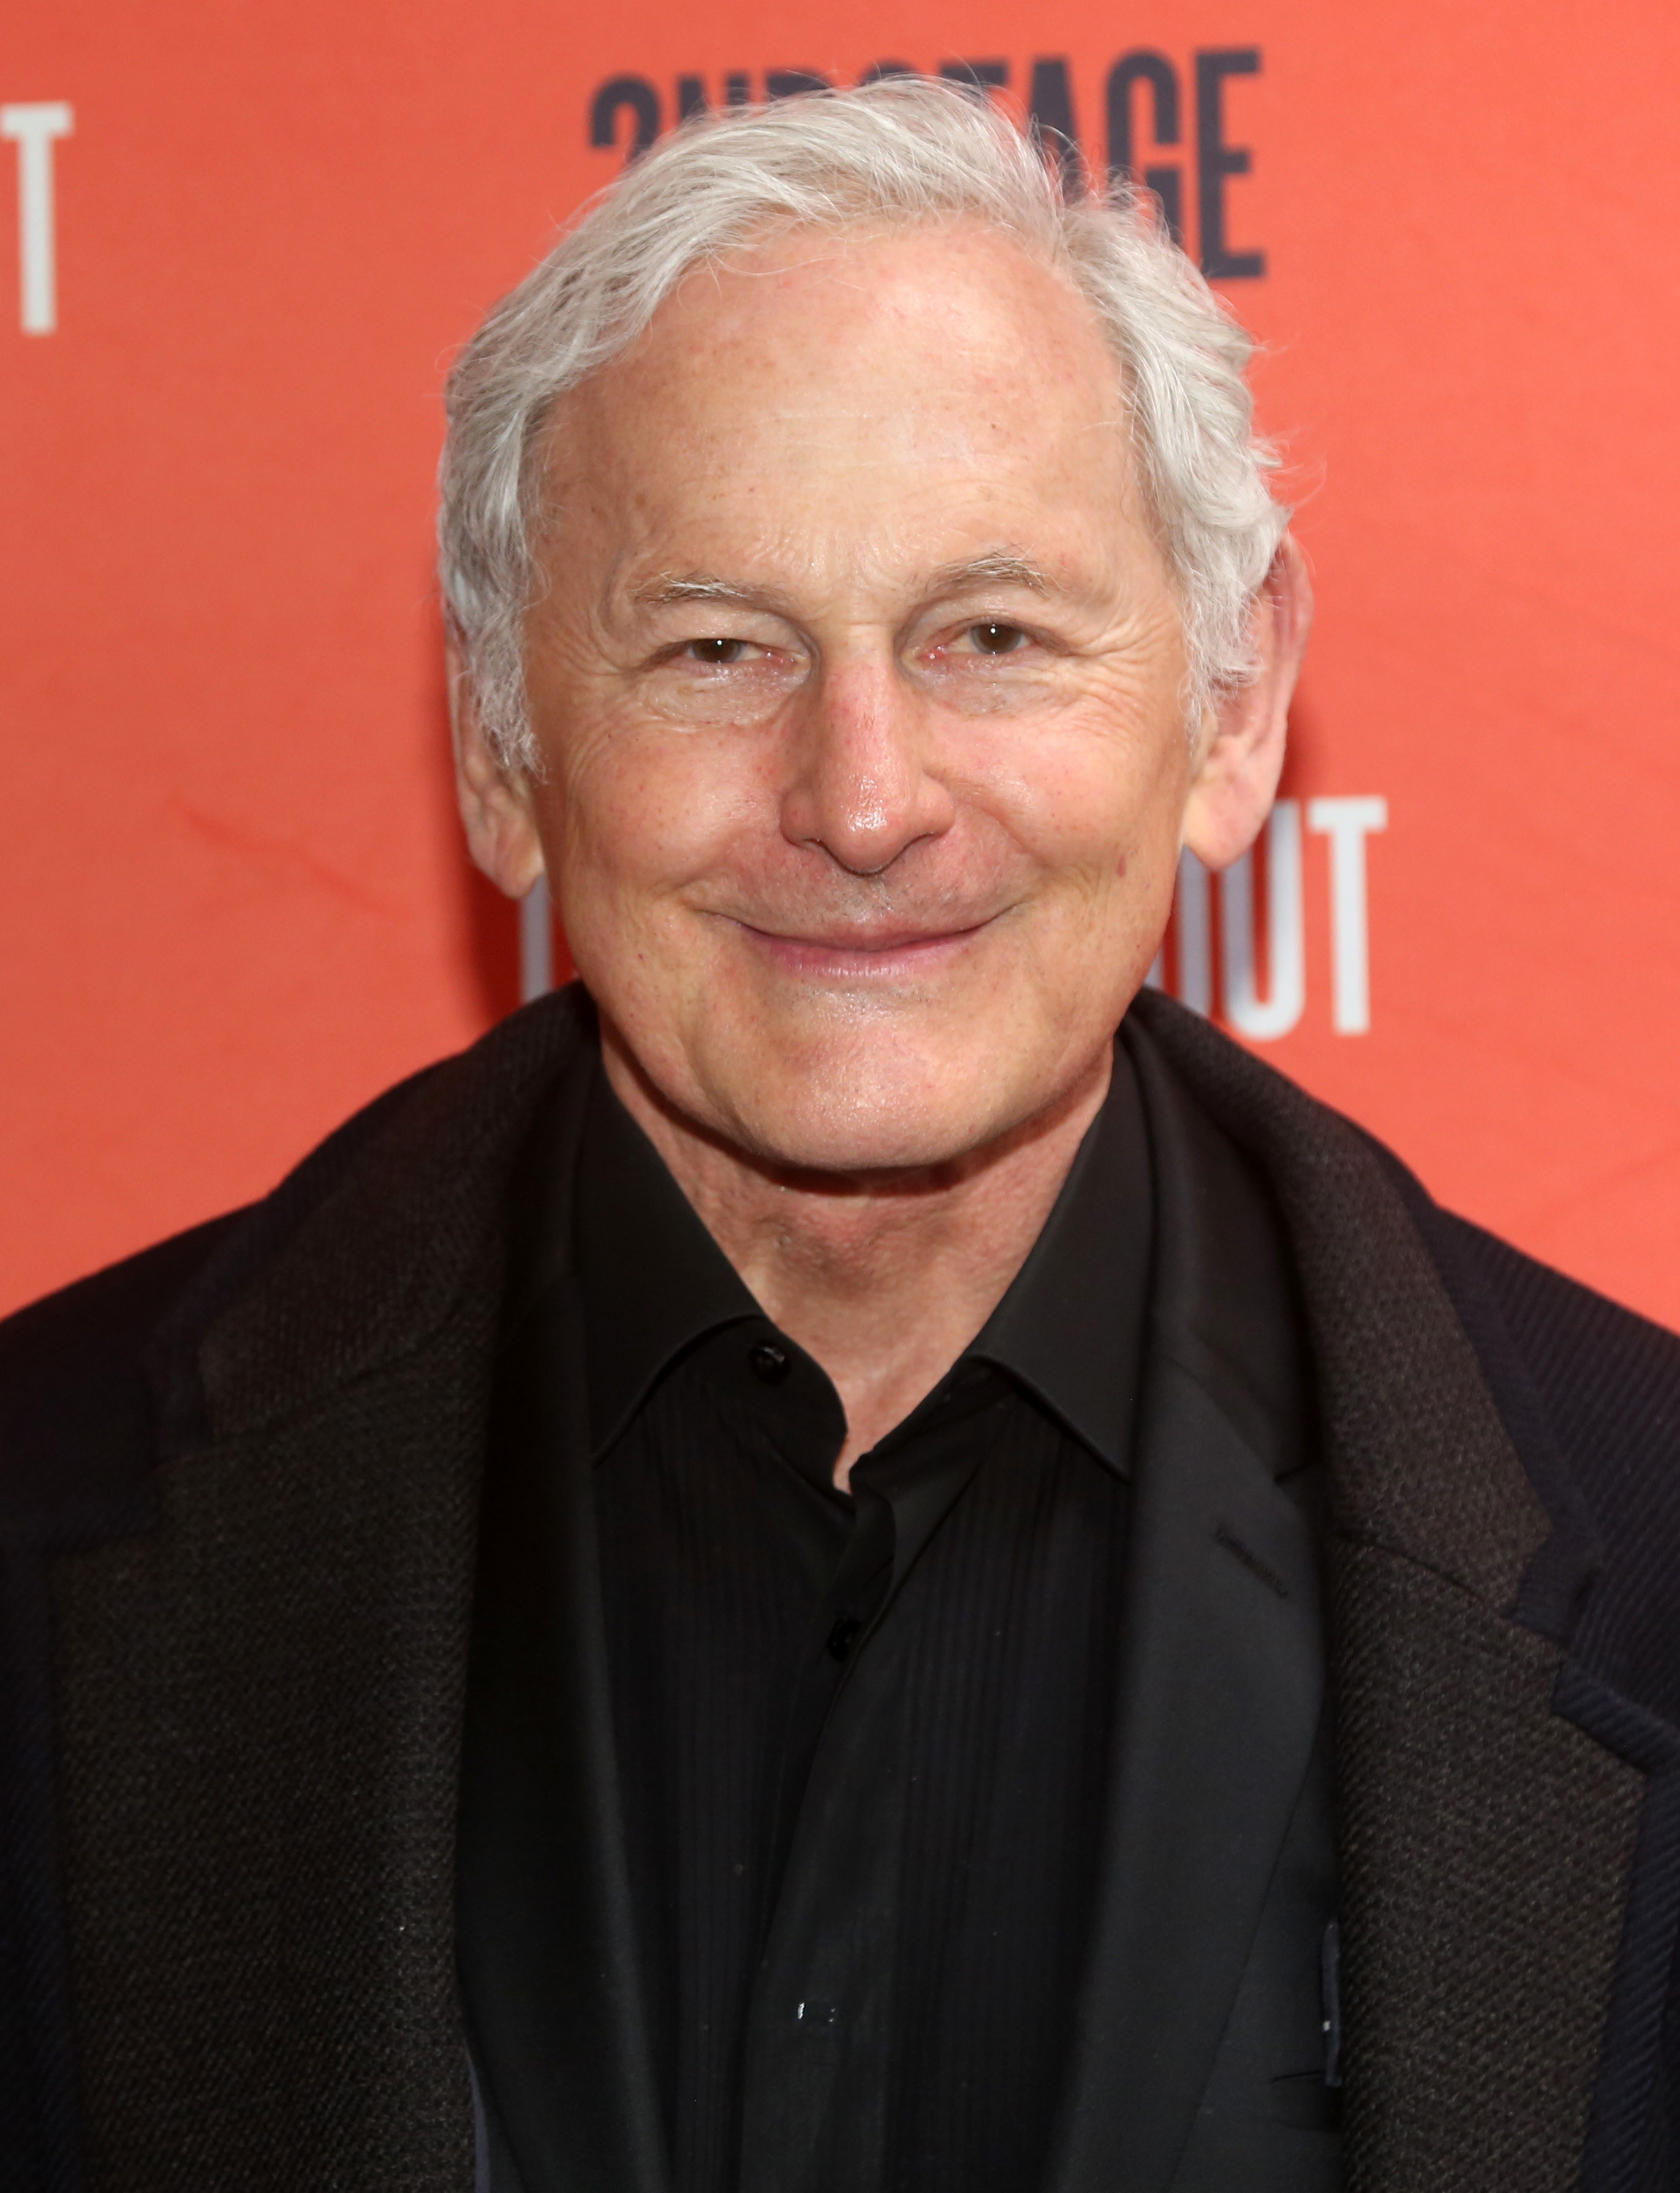 Victor Garber wearing all-black posing at an event